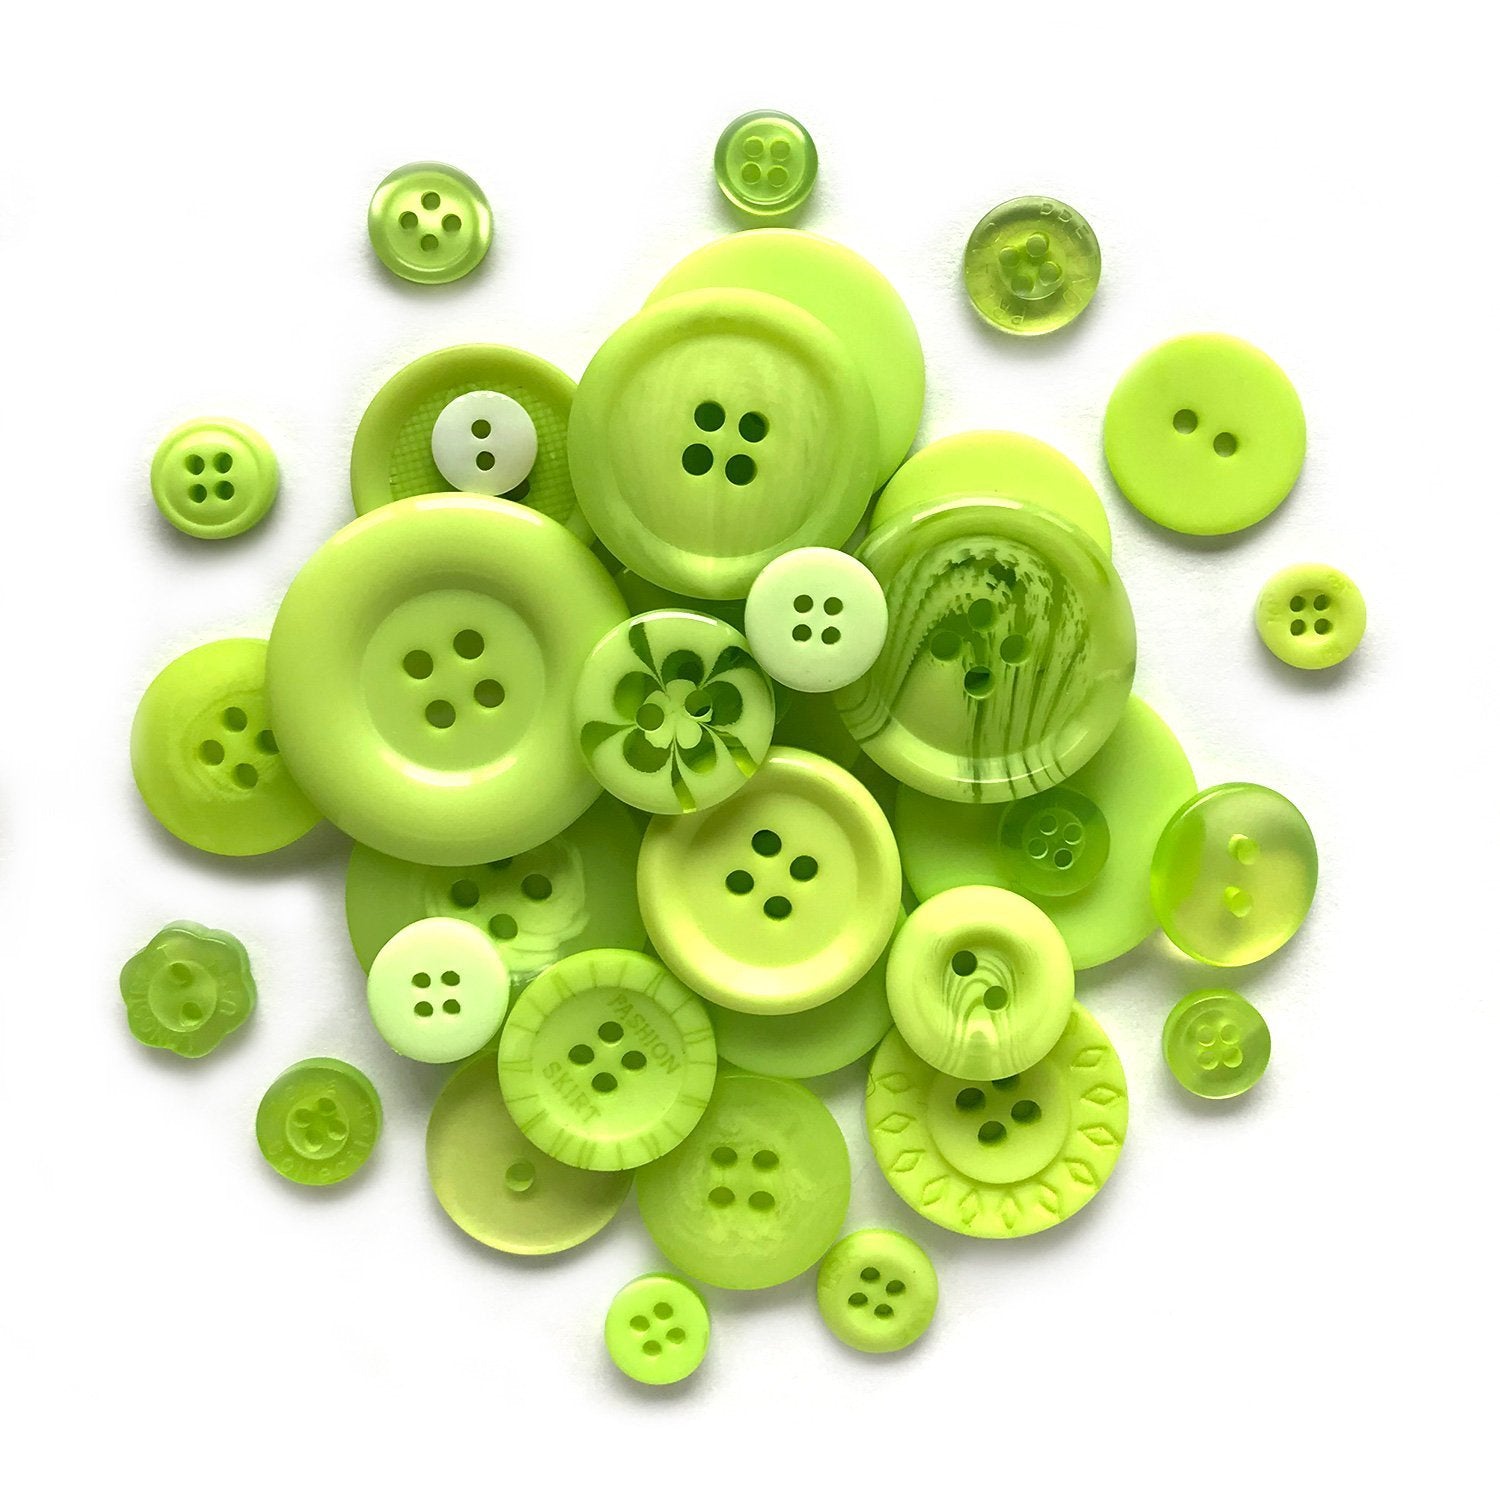 Buy Buttons Online - Sewing and Craft Buttons for Sale